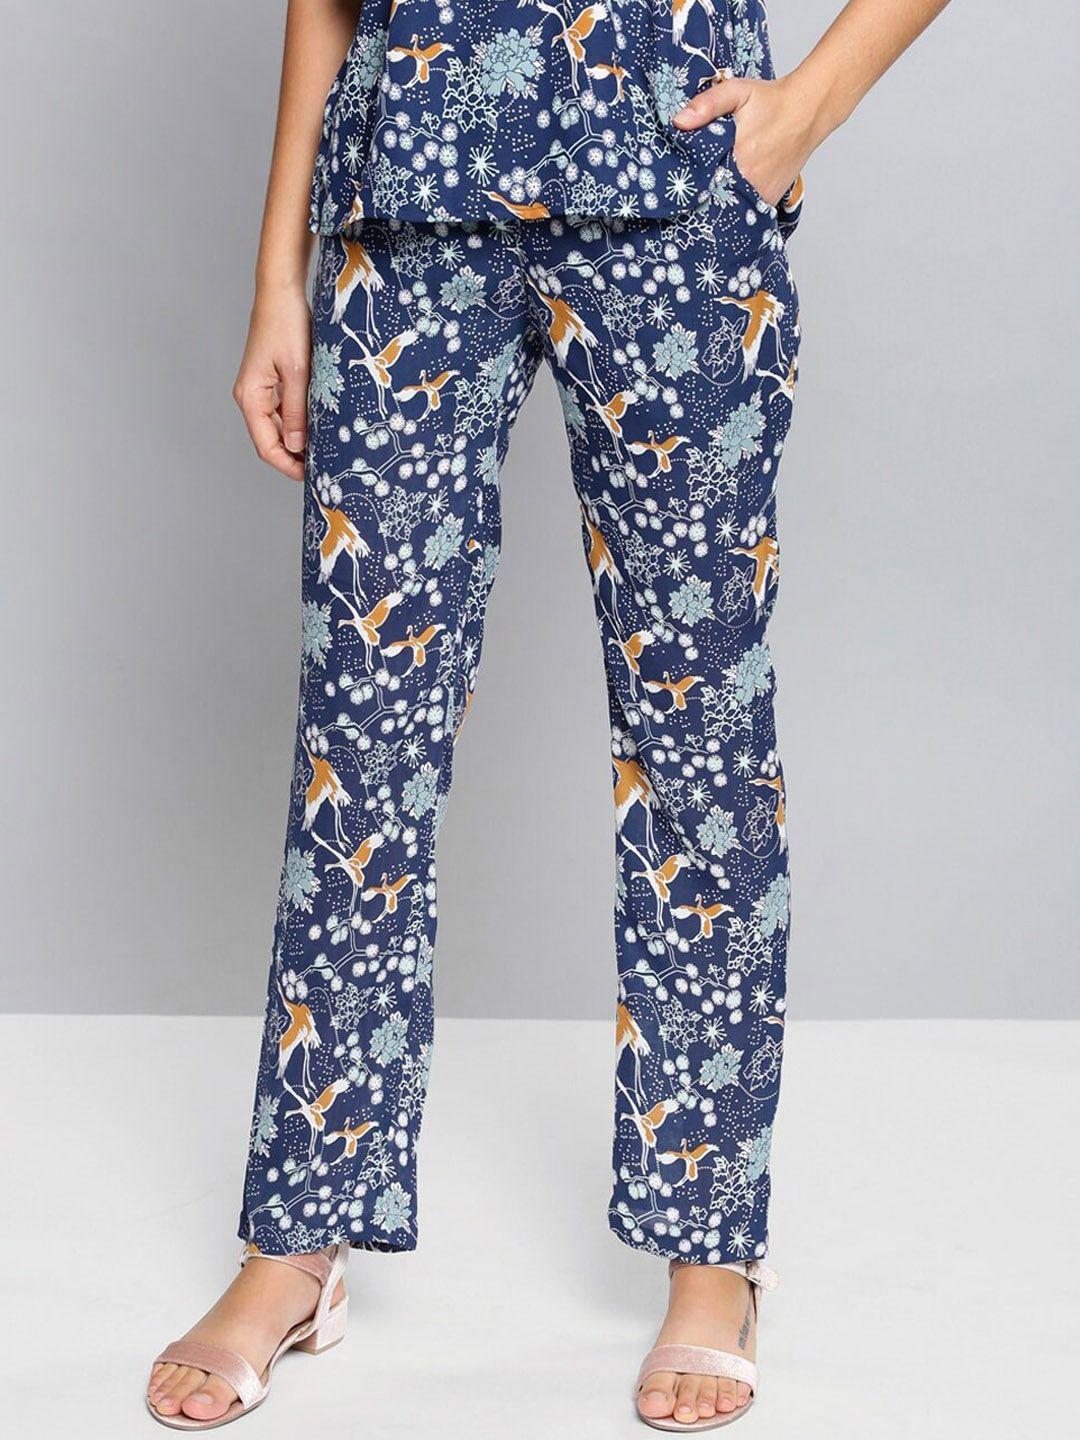 mast & harbour women blue floral printed trousers